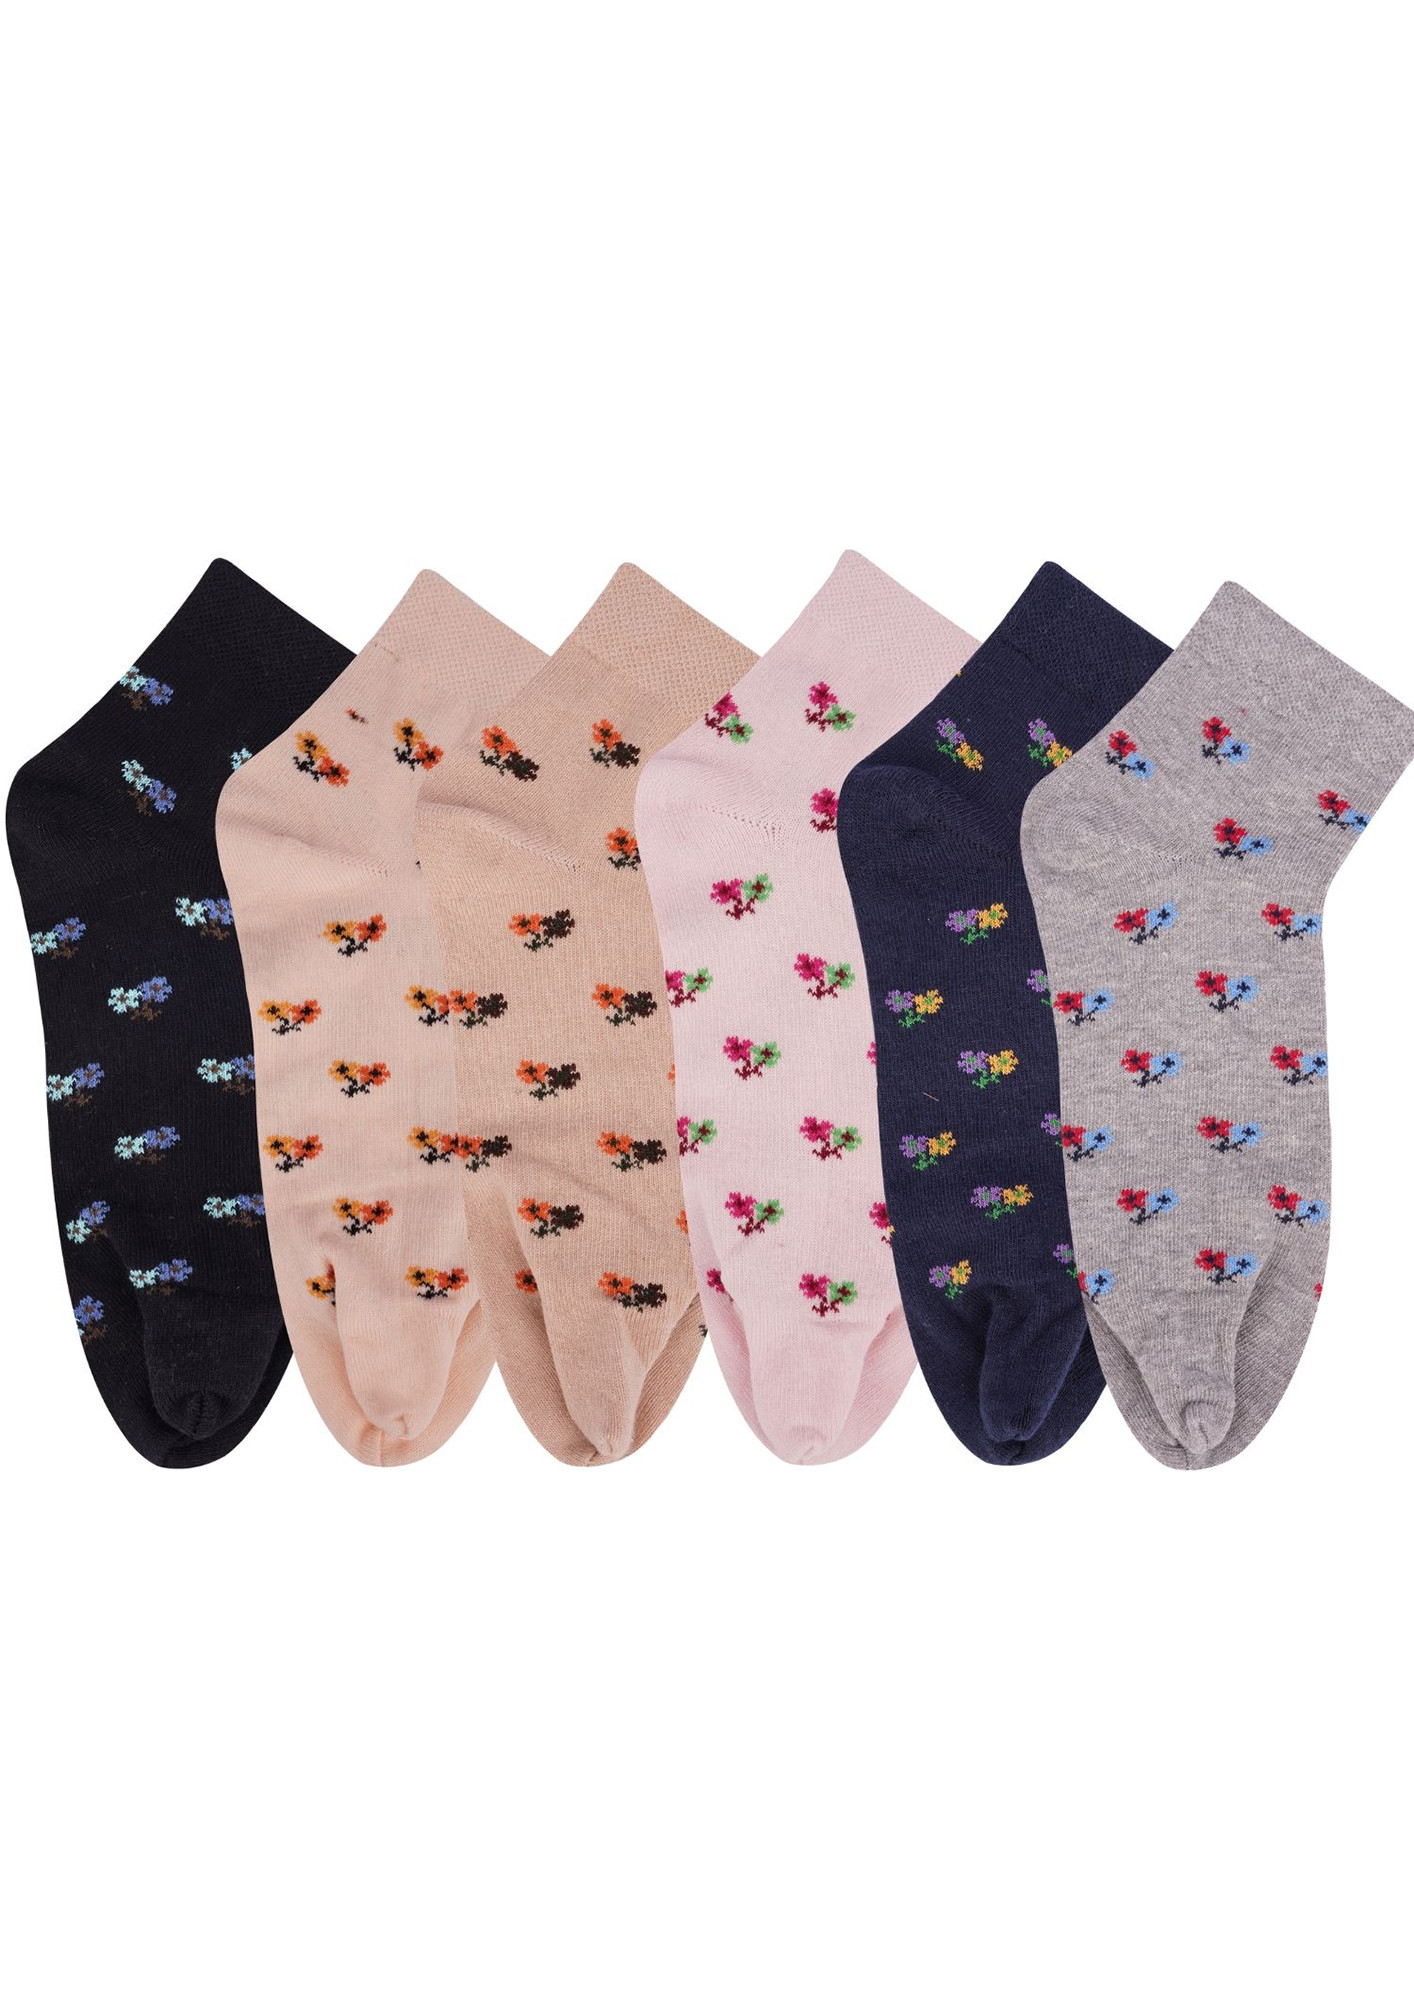 N2S NEXT2SKIN Women's Cotton Ankle Length Thumb Floral Pattern Socks - Pack of 6 Pairs (Multicolor)